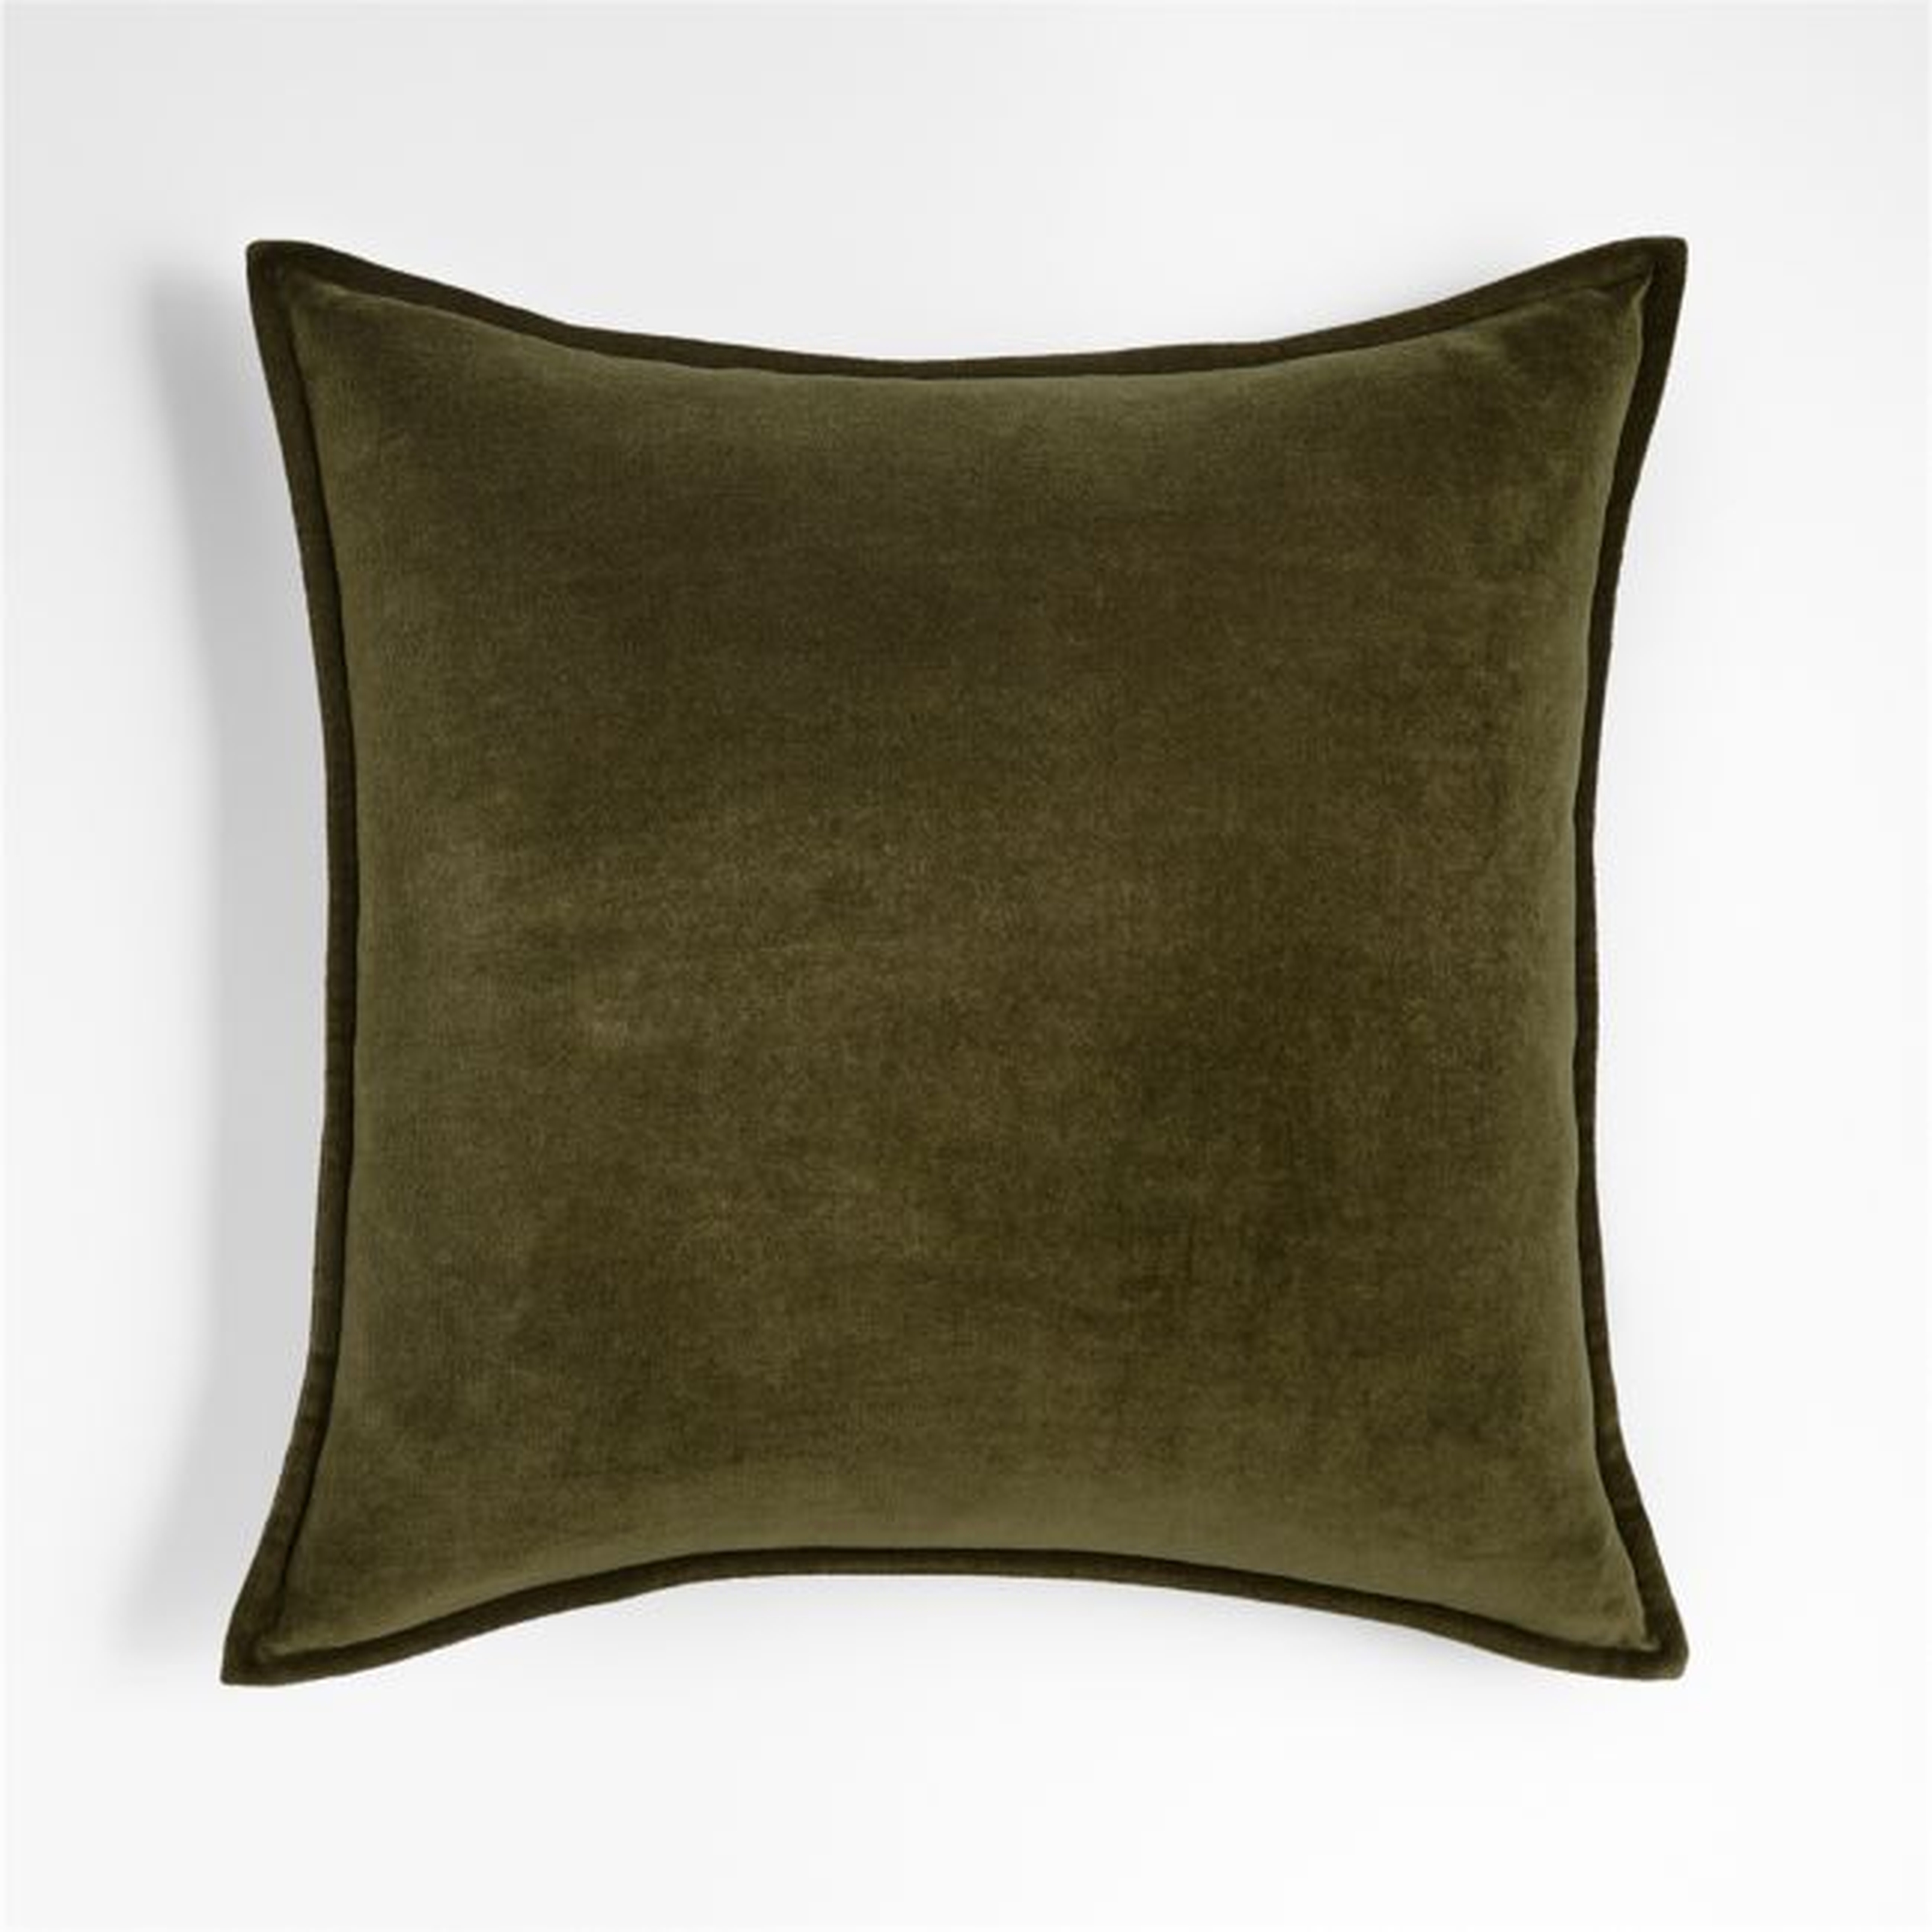 Washed Cotton Velvet Pillow with Down-Alternative Insert, Dark Green, 20" x 20" - Crate and Barrel